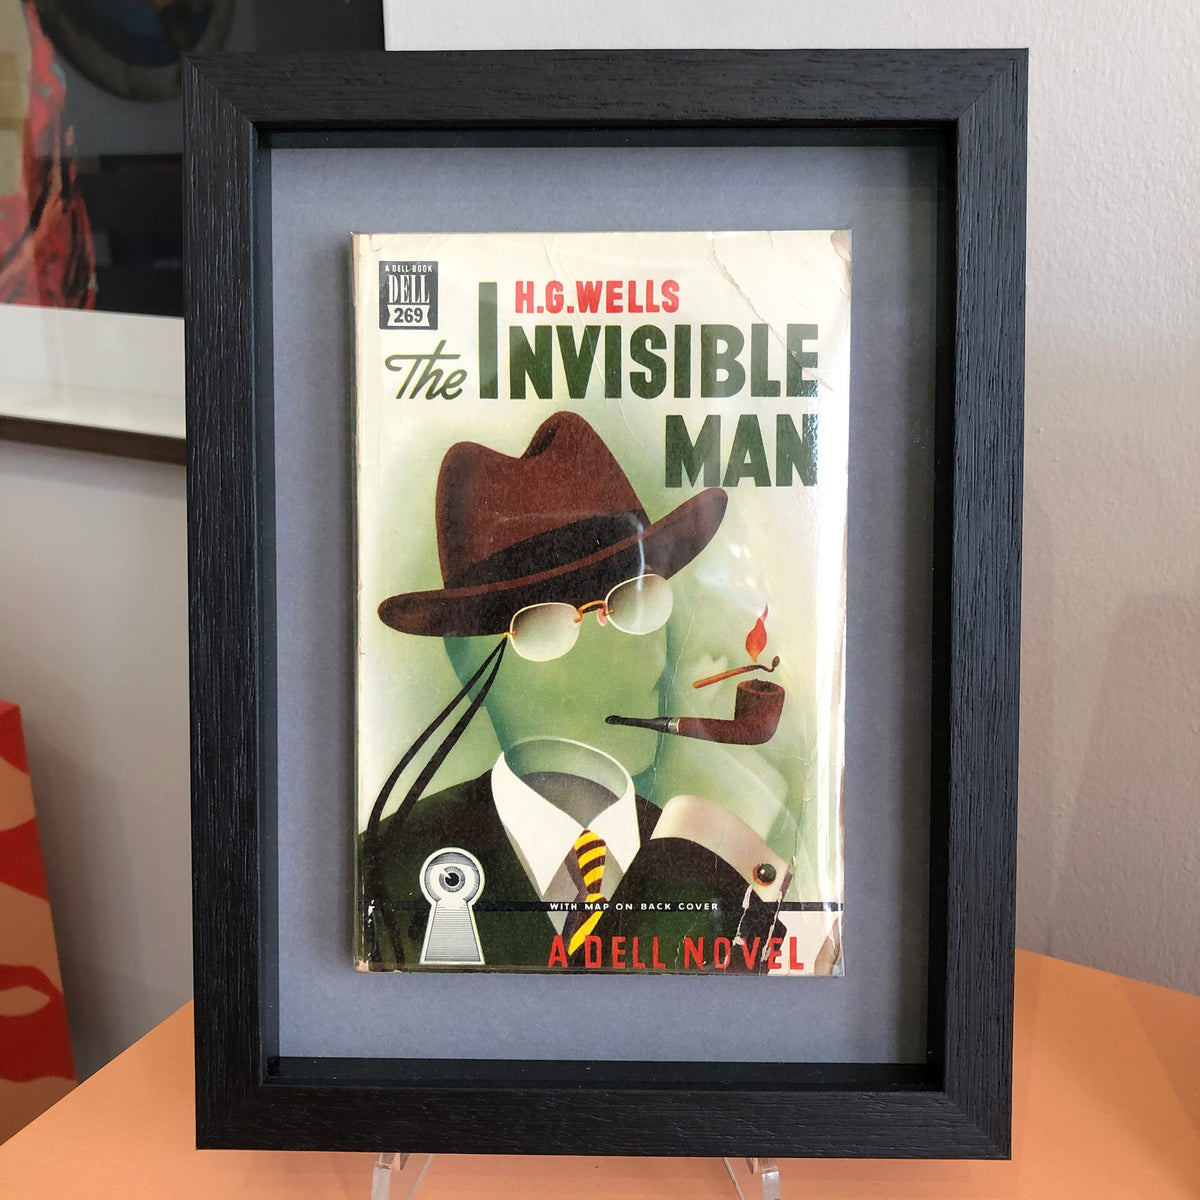 The Invisible Man by Mark S Payne